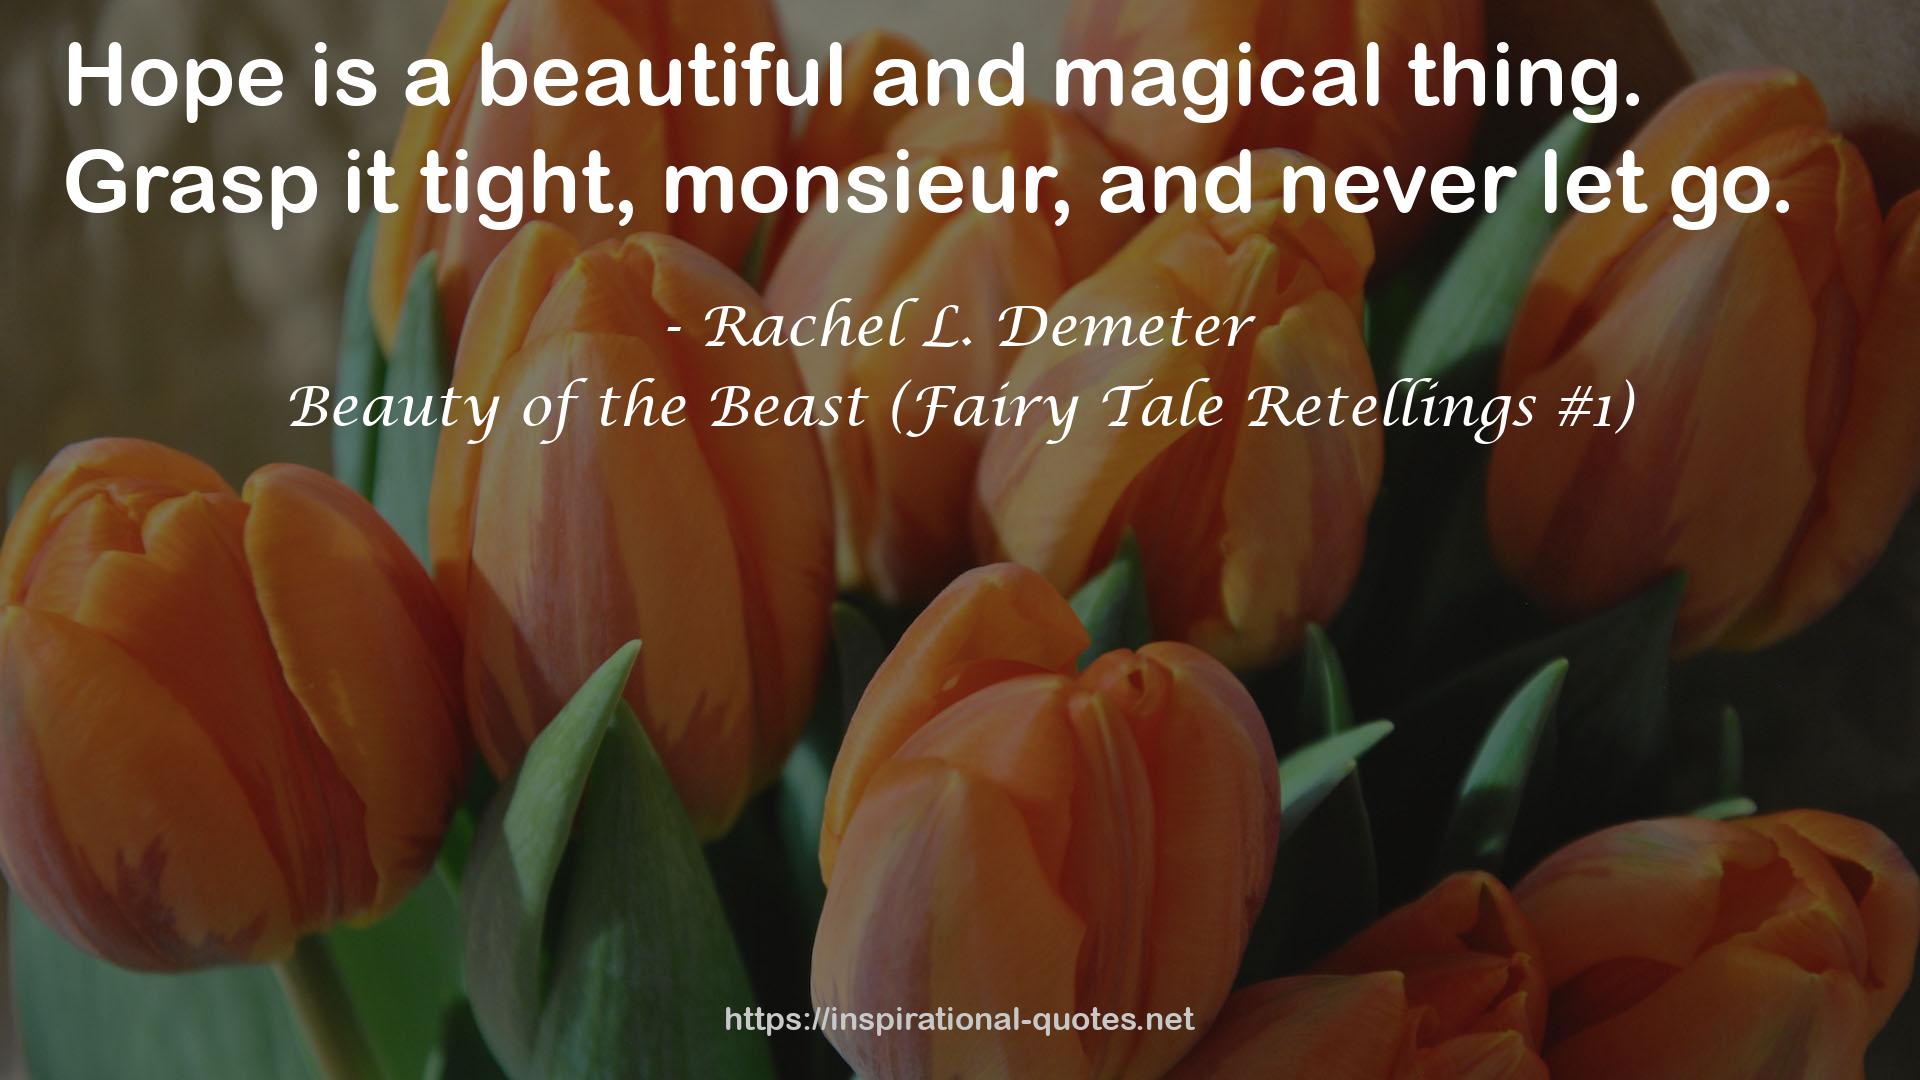 Beauty of the Beast (Fairy Tale Retellings #1) QUOTES